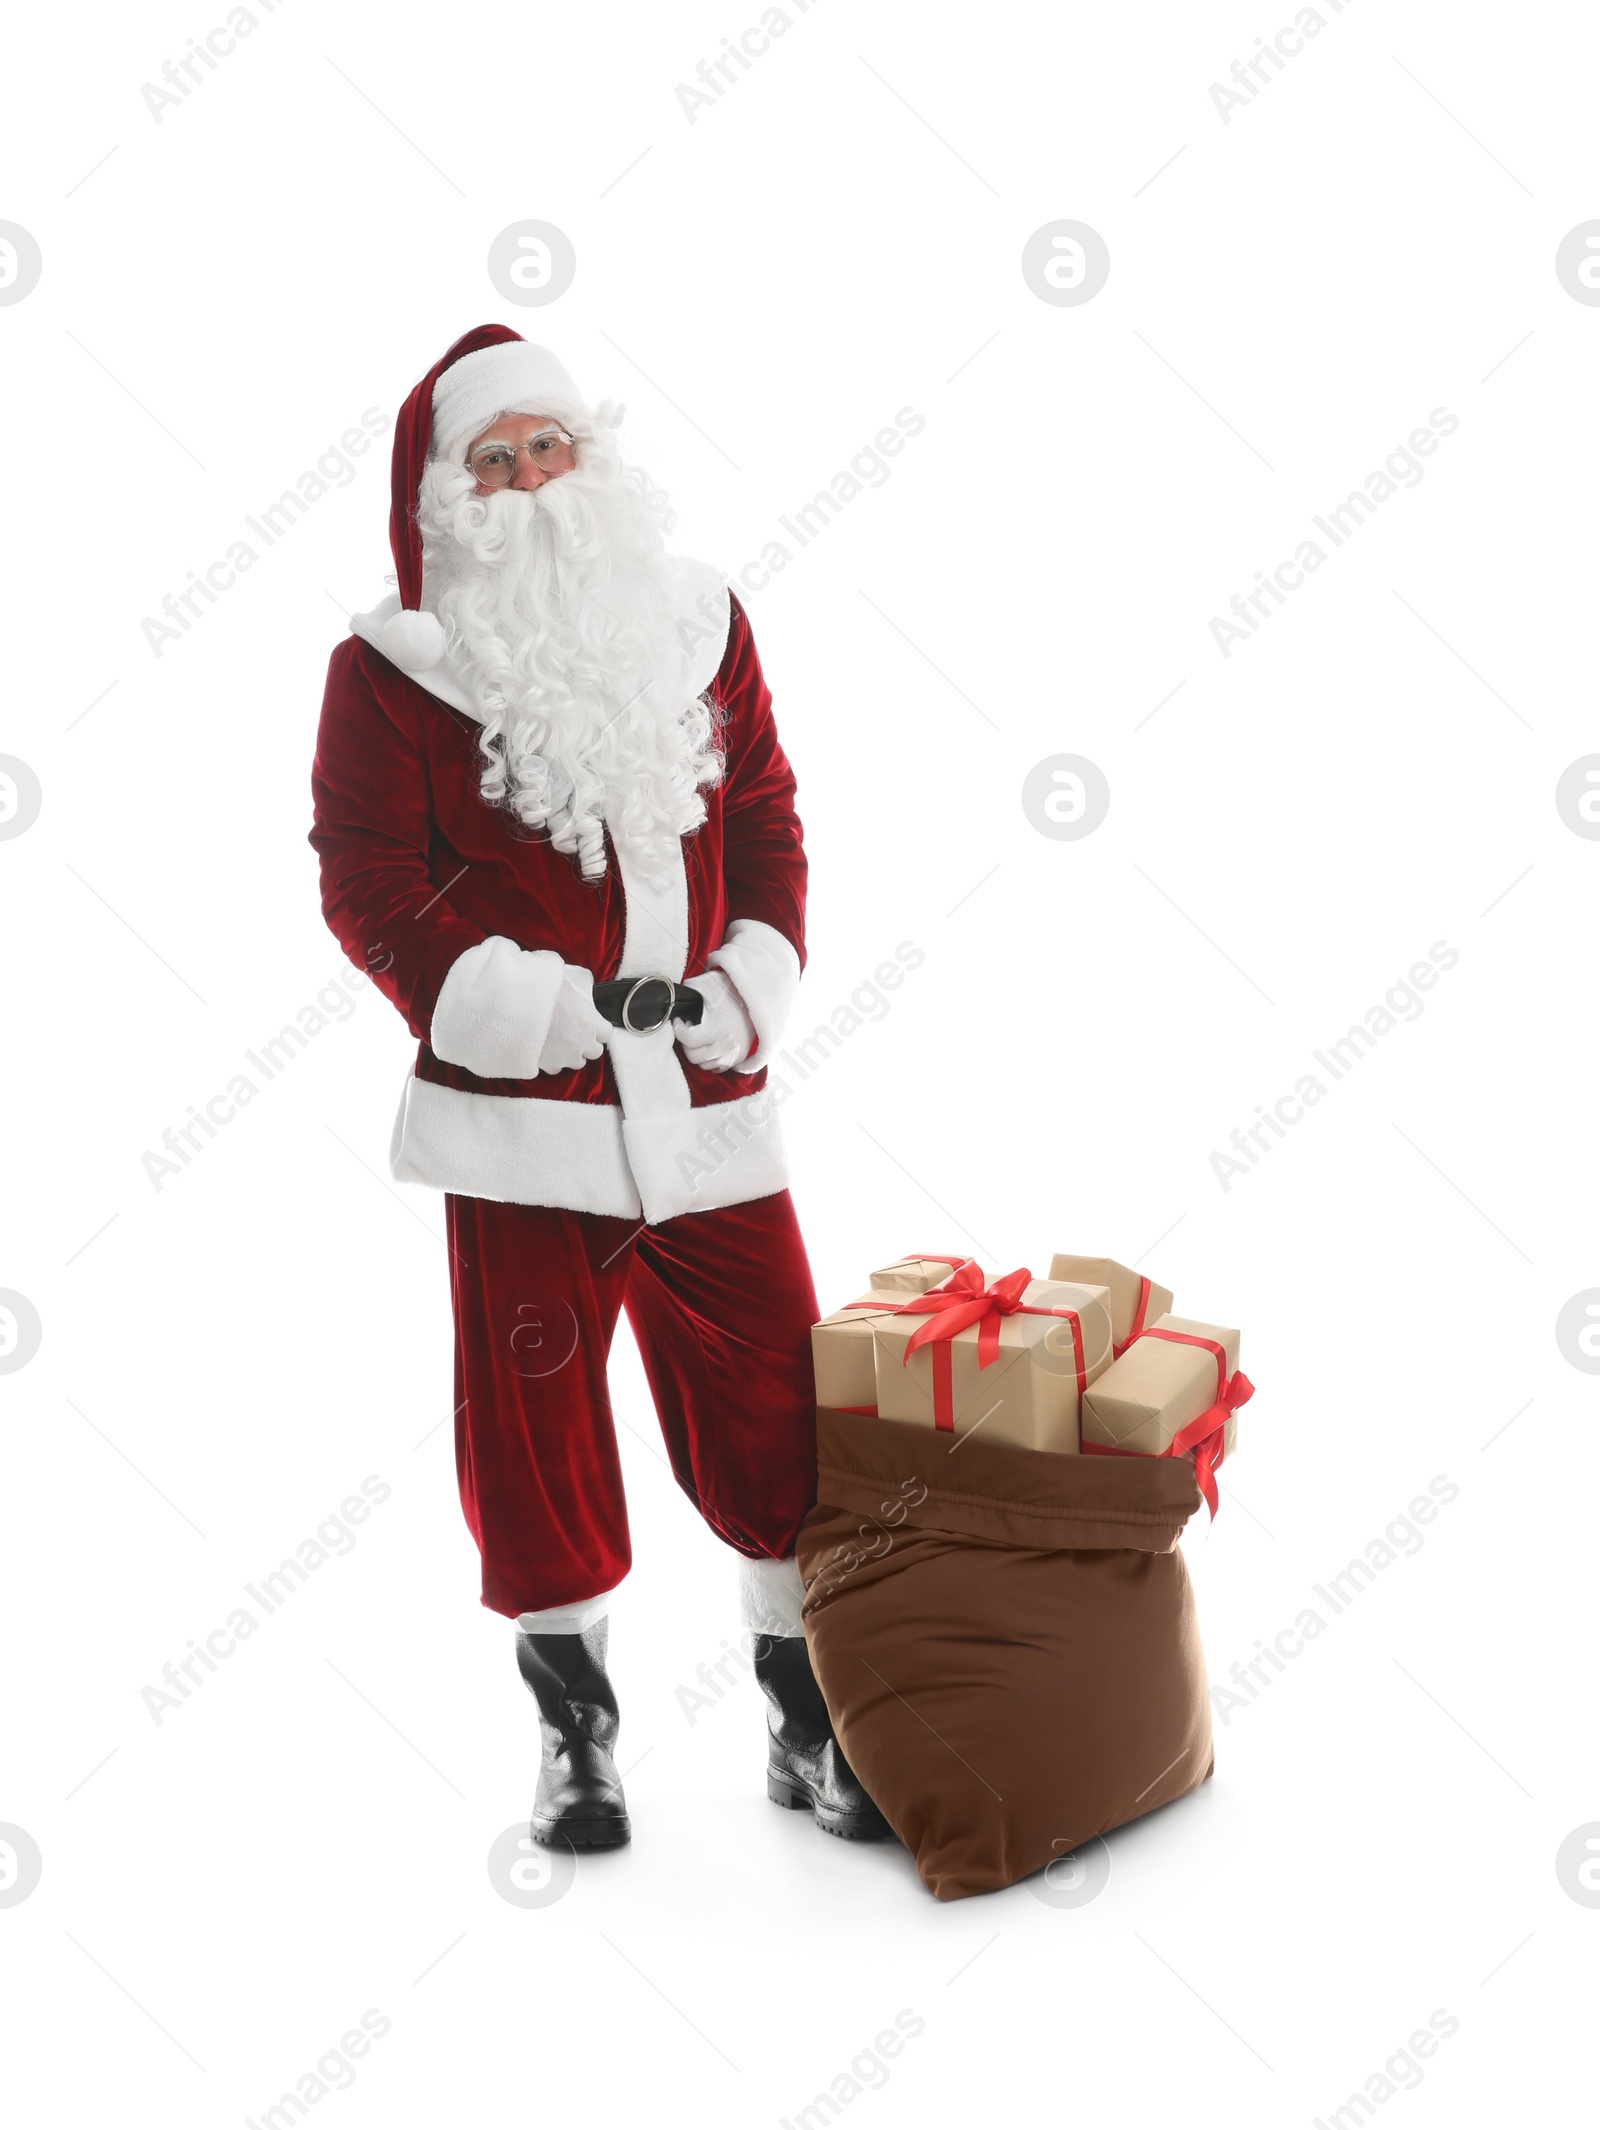 Photo of Santa Claus near sack of gifts on white background